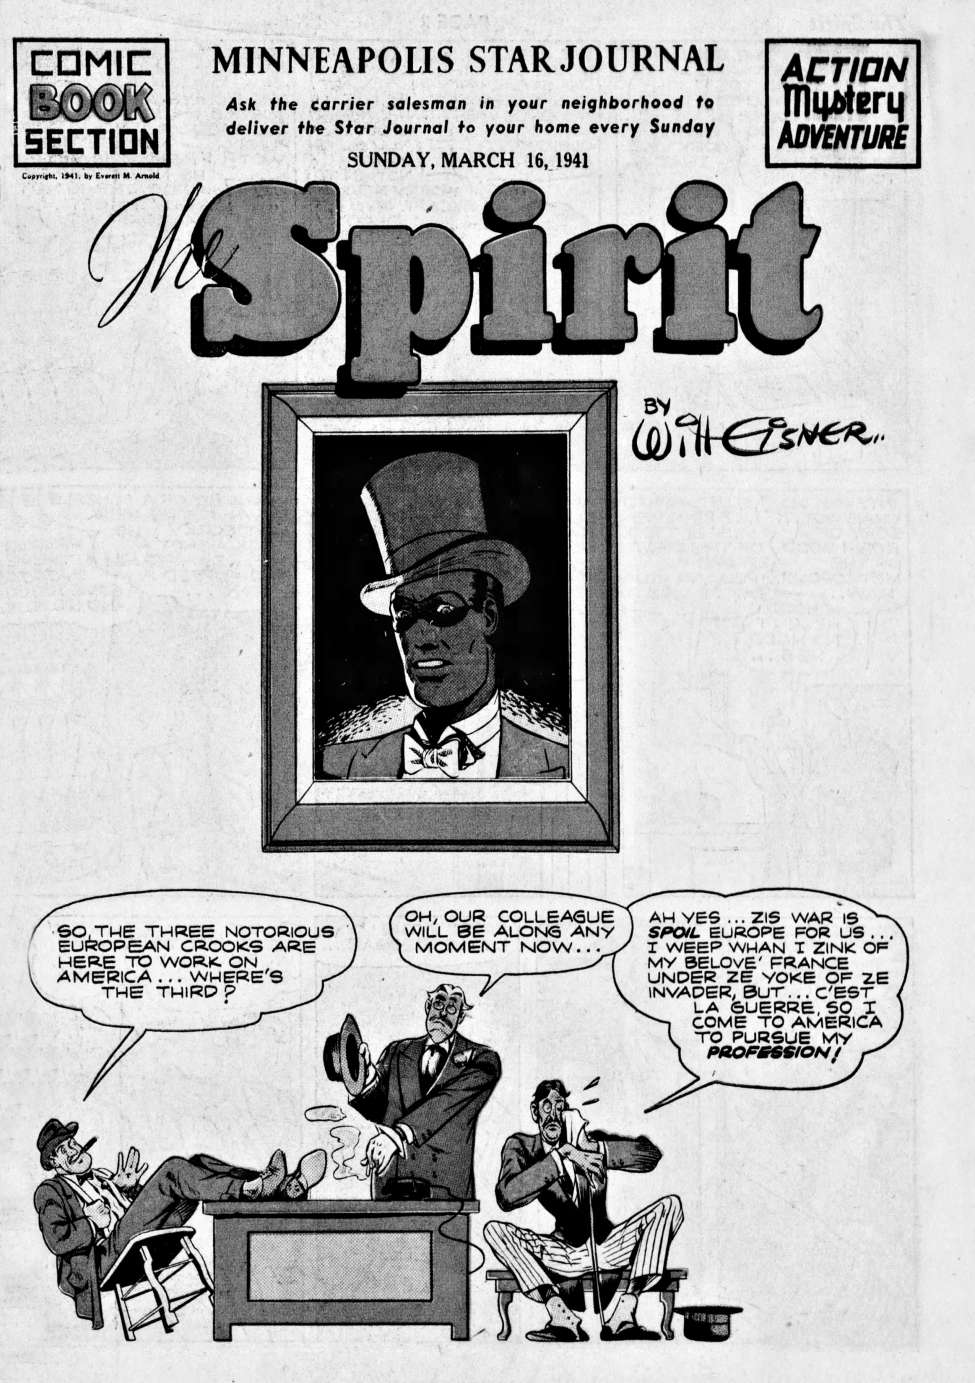 Book Cover For The Spirit (1941-03-16) - Minneapolis Star Journal (b/w)